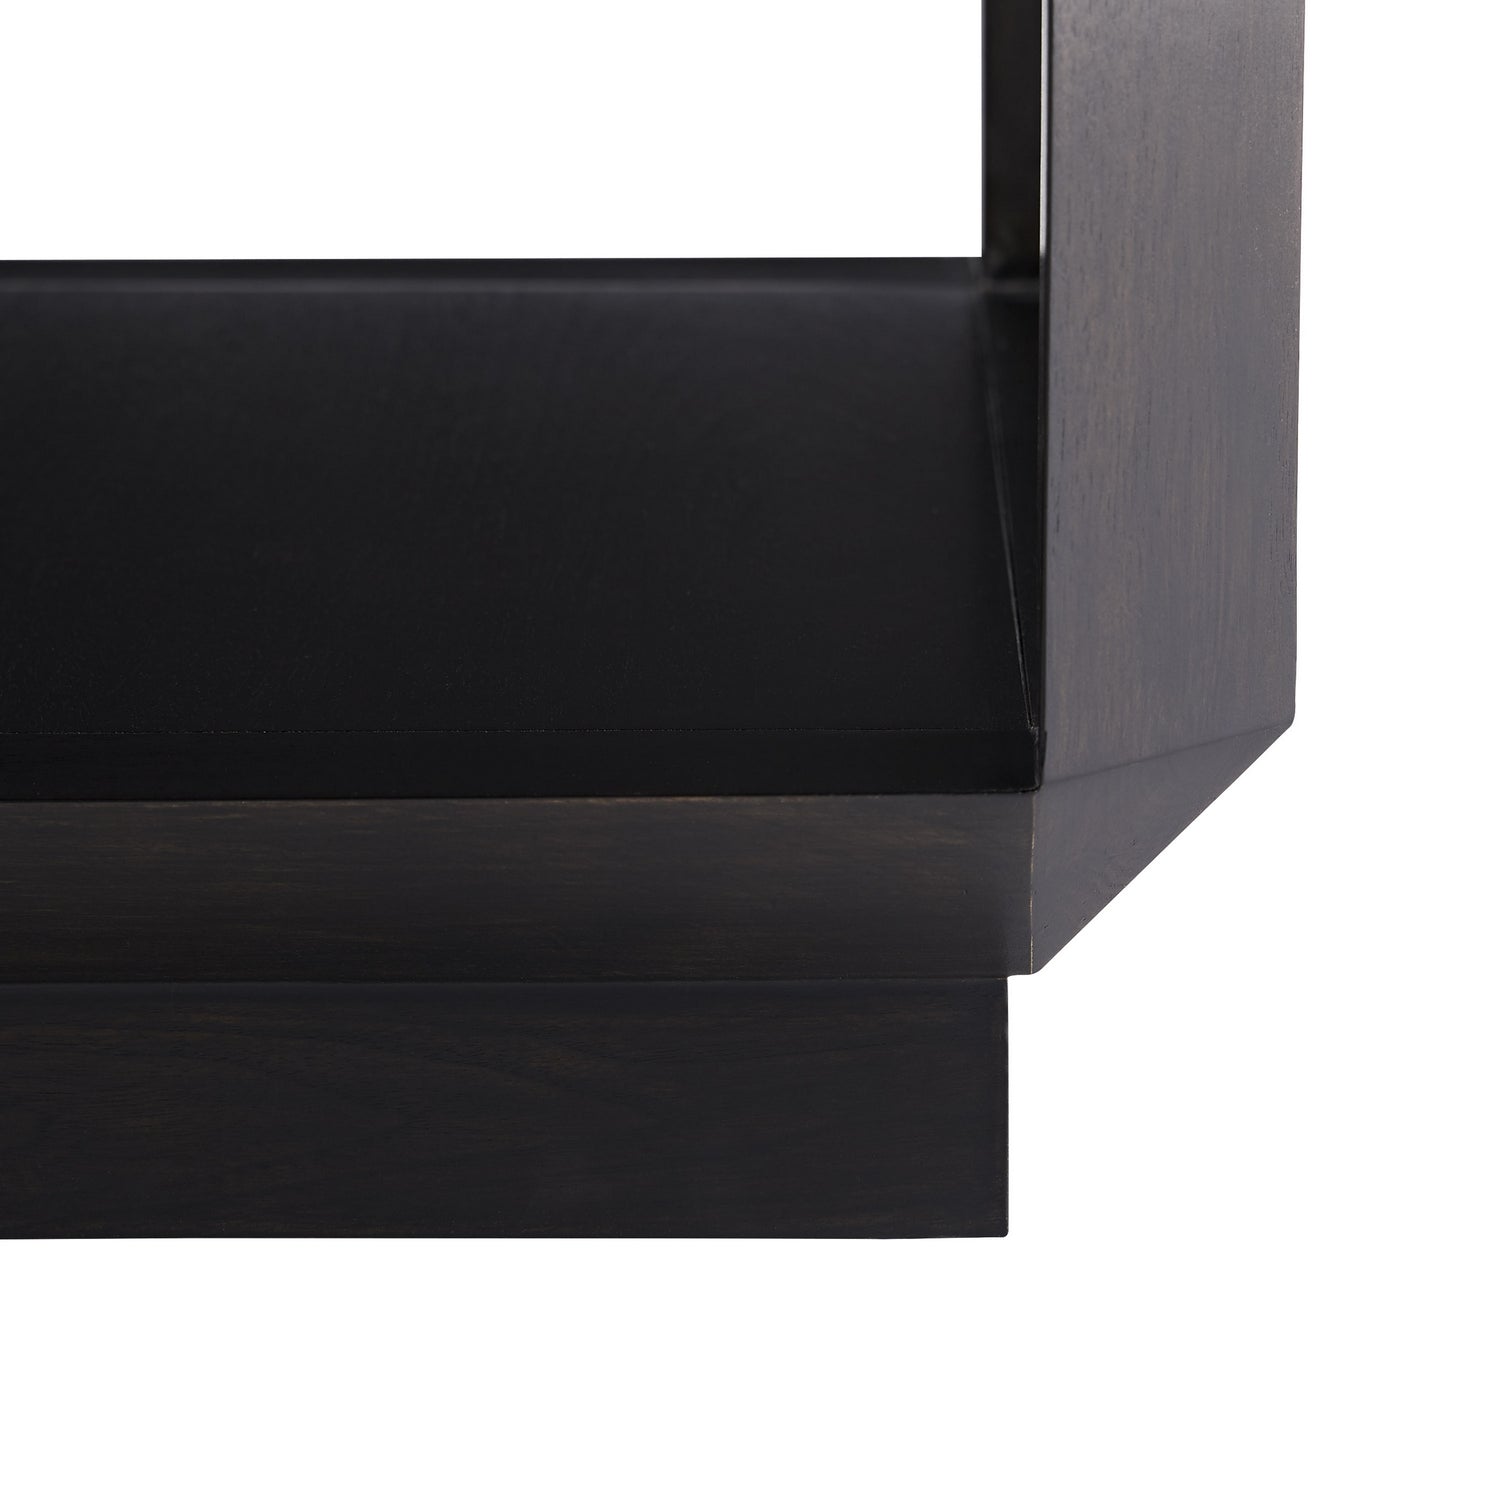 End Table from the Dani collection in Ebony finish